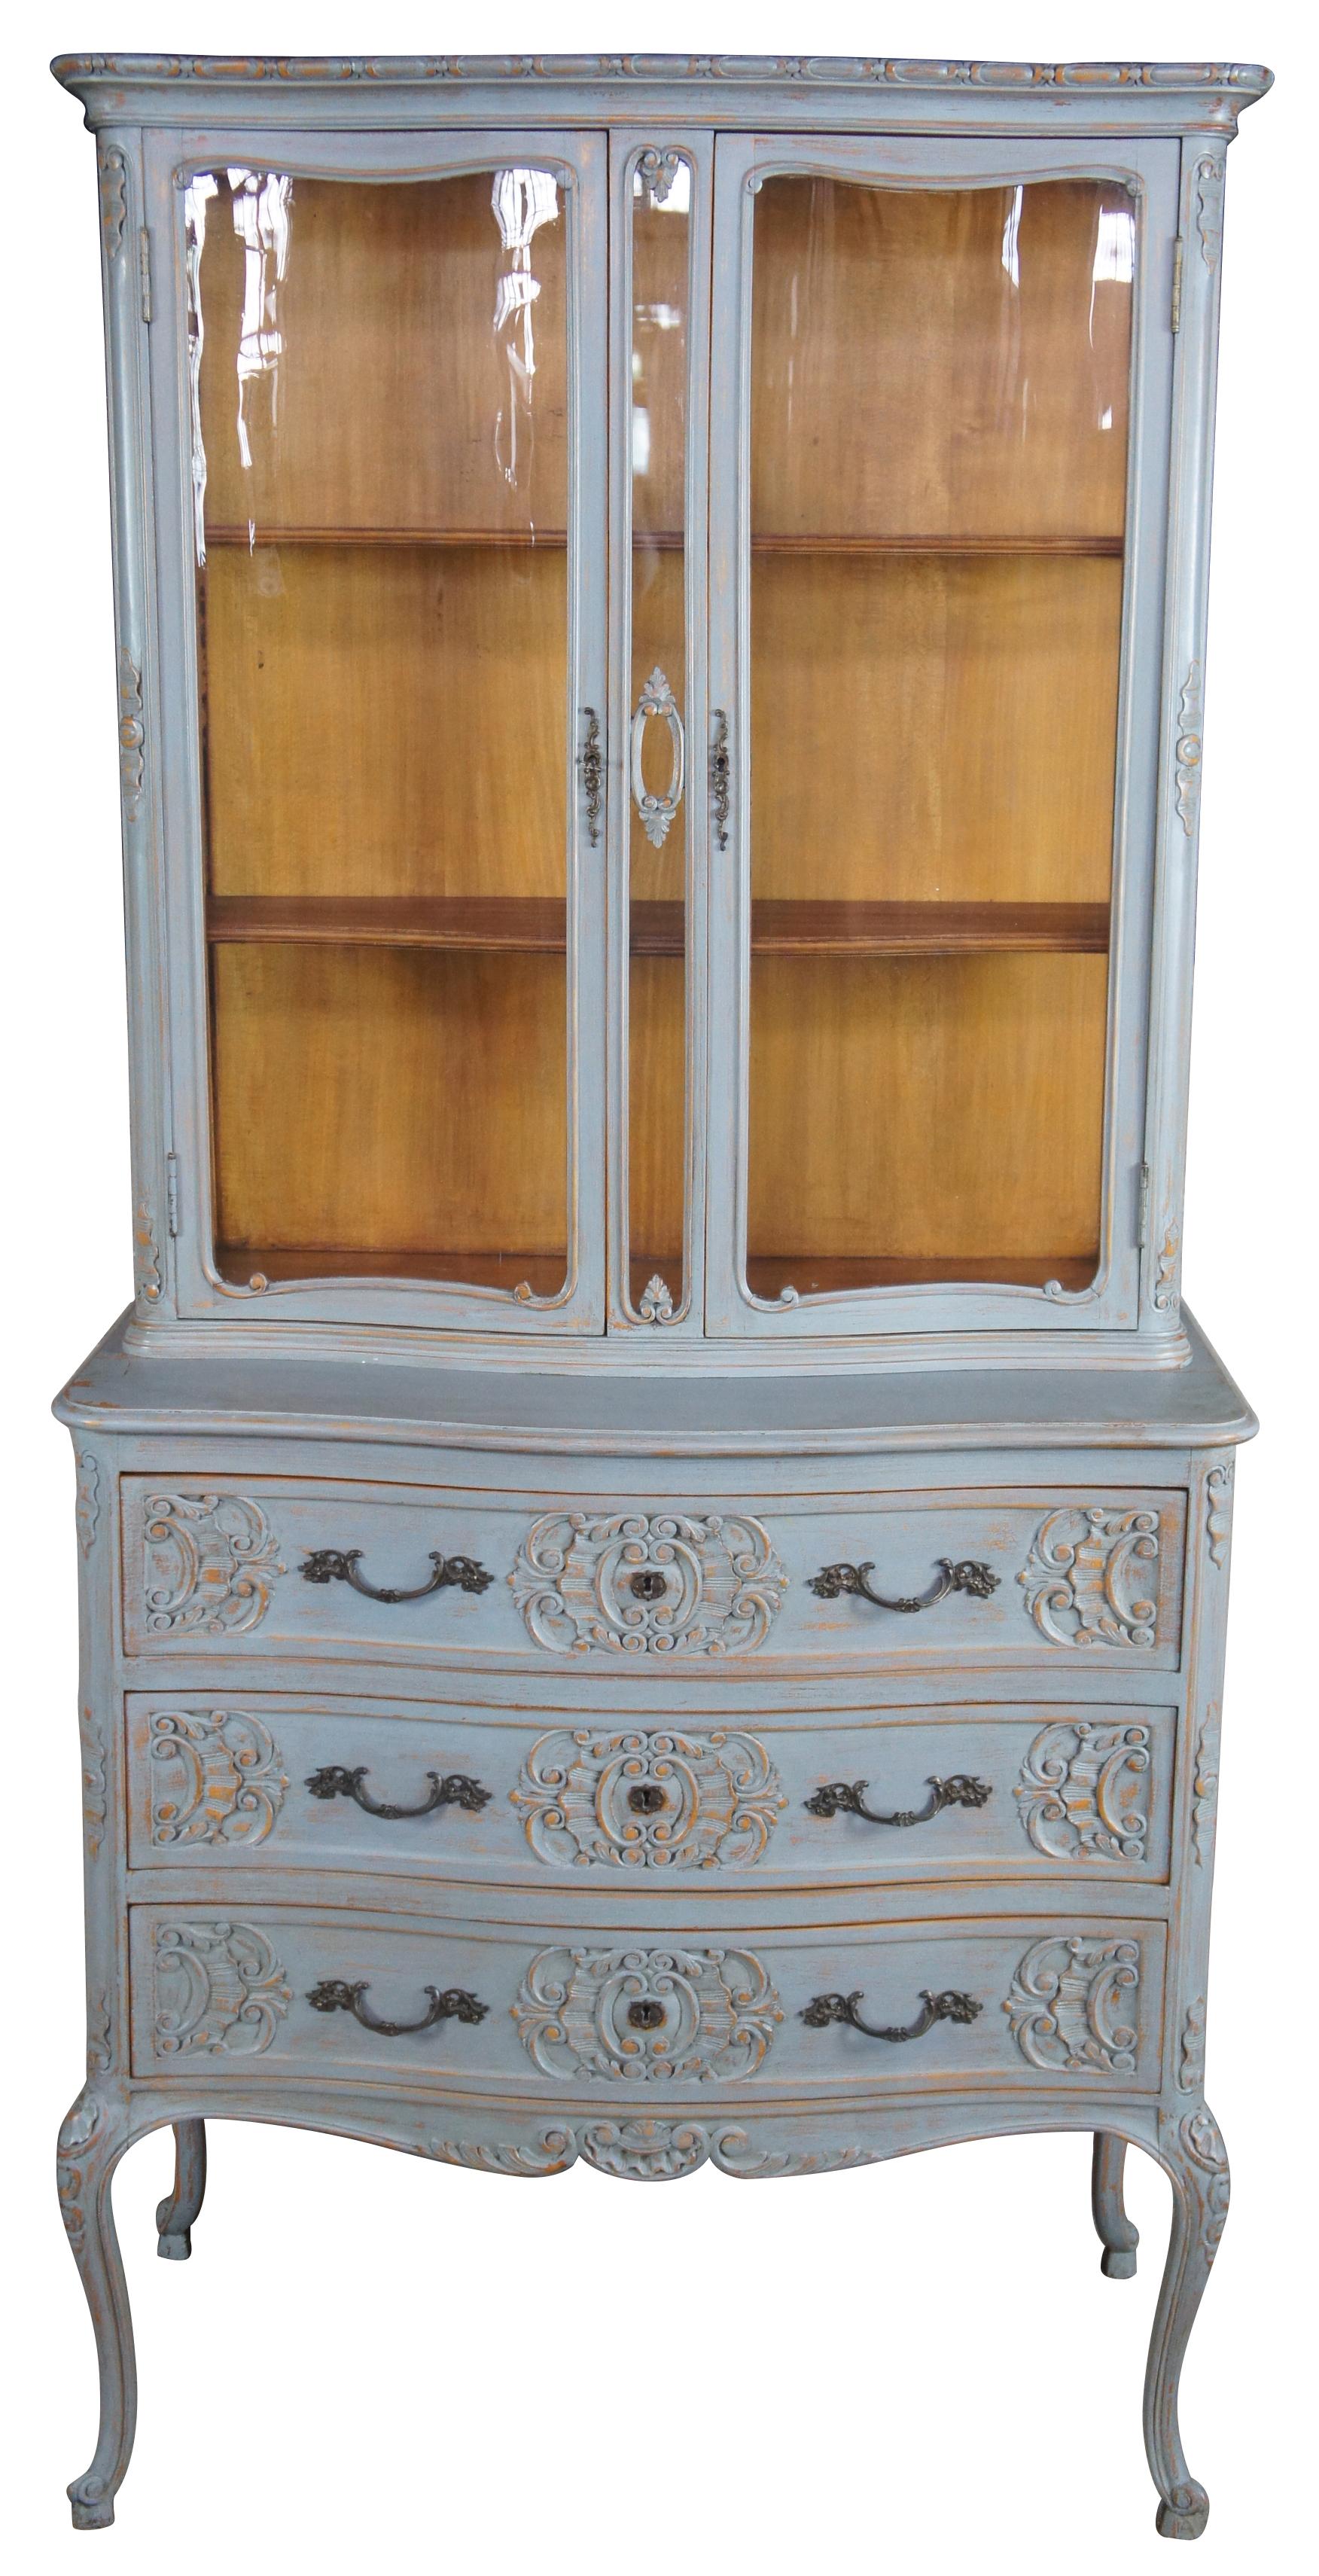 Early 20th century French curio cabinet. Made from oak. Features three scalloped and carved drawers, cabriole legs and a glass covered hutch with two shelves. Painted grey with metal hardware.
   